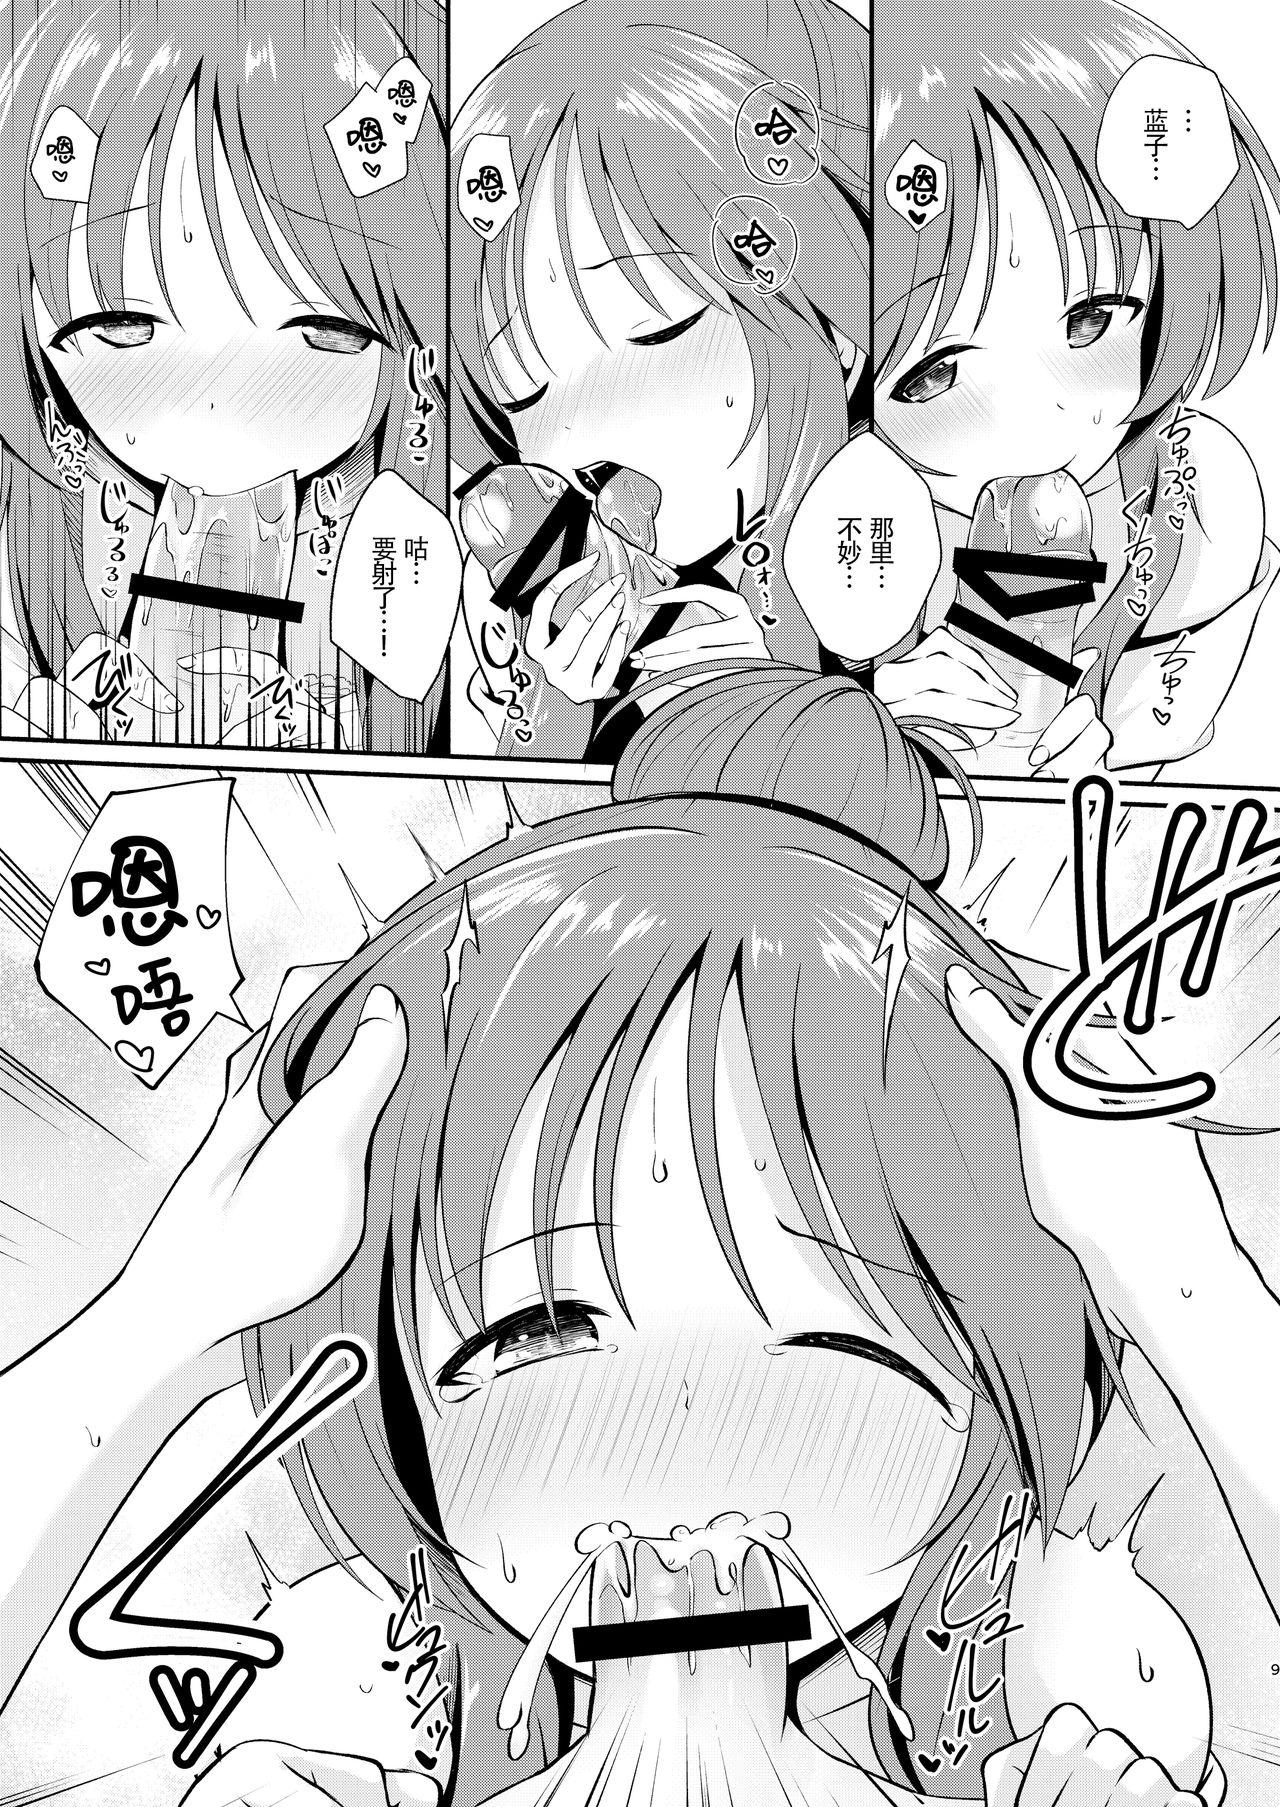 Classroom Aiko Myu Endless 8 - The idolmaster Pussysex - Page 10